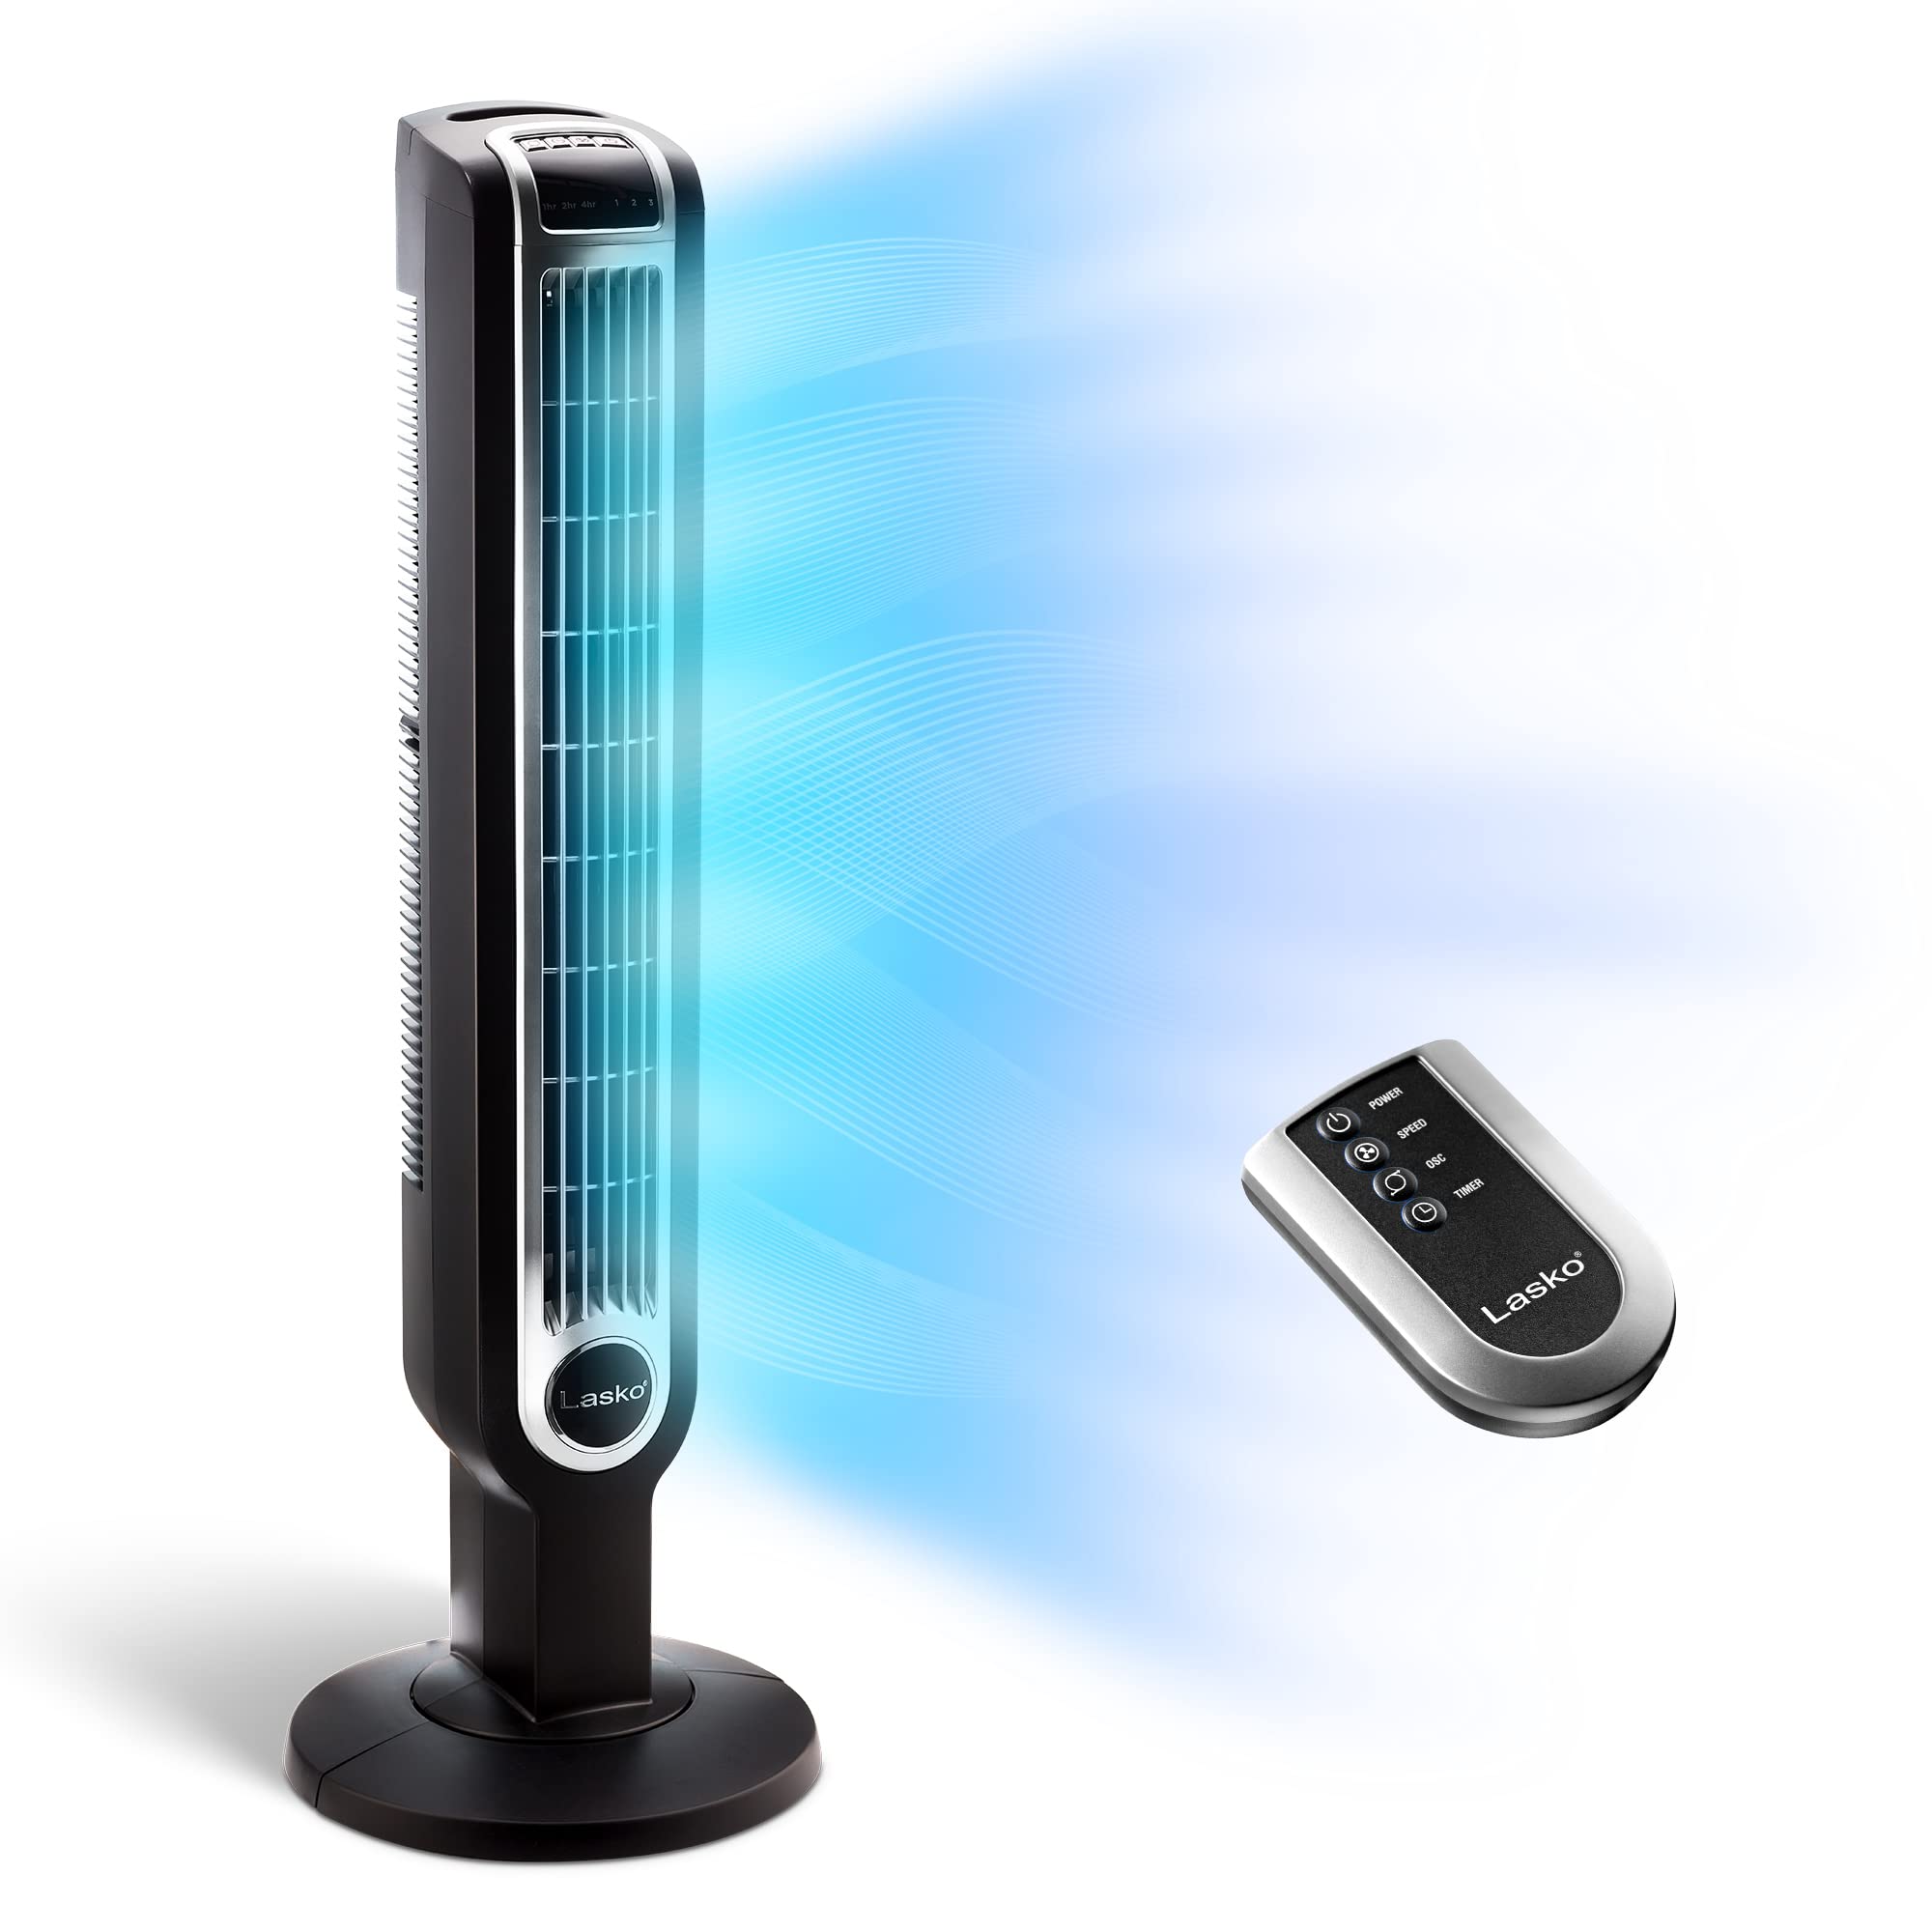 Save 24% -> $52.99 Lasko 2511 36" Tower Fan with Remote Control and Timer